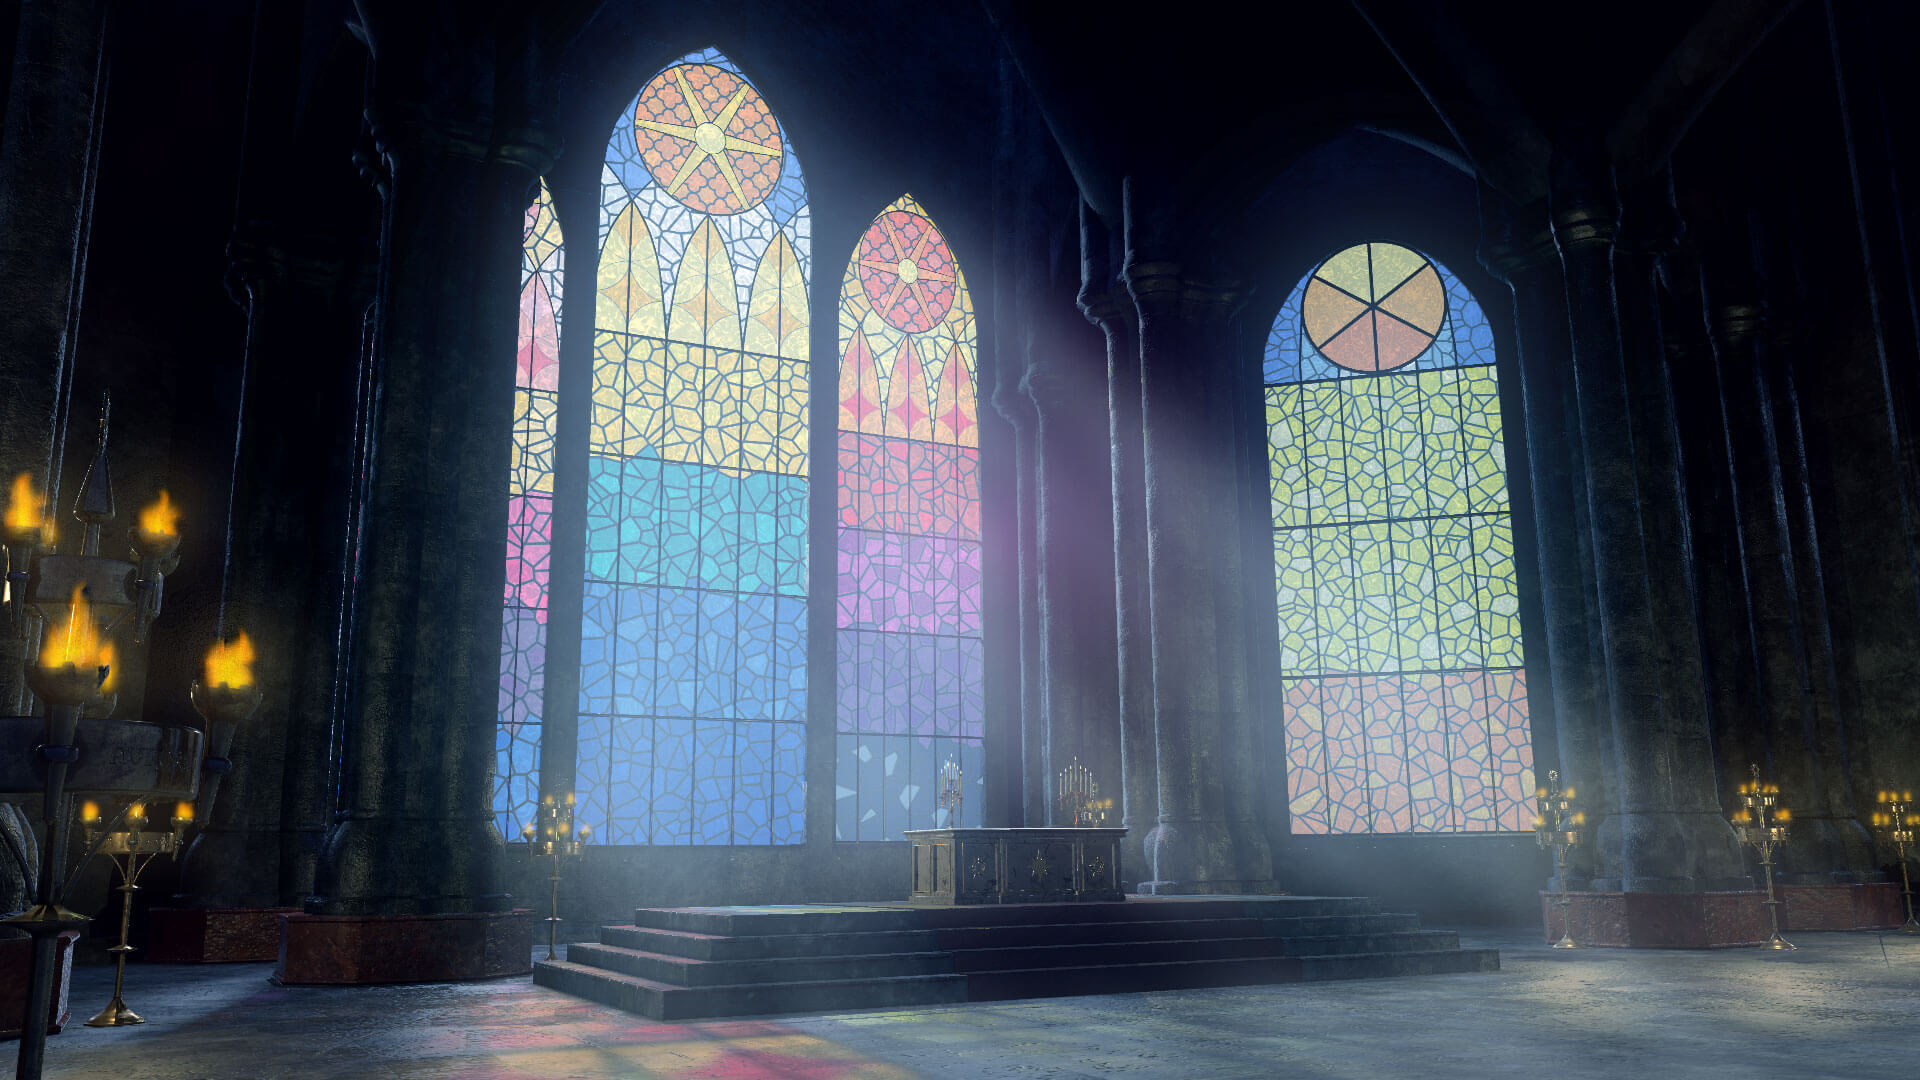 Interior of a massive church with light shining through stained glass.